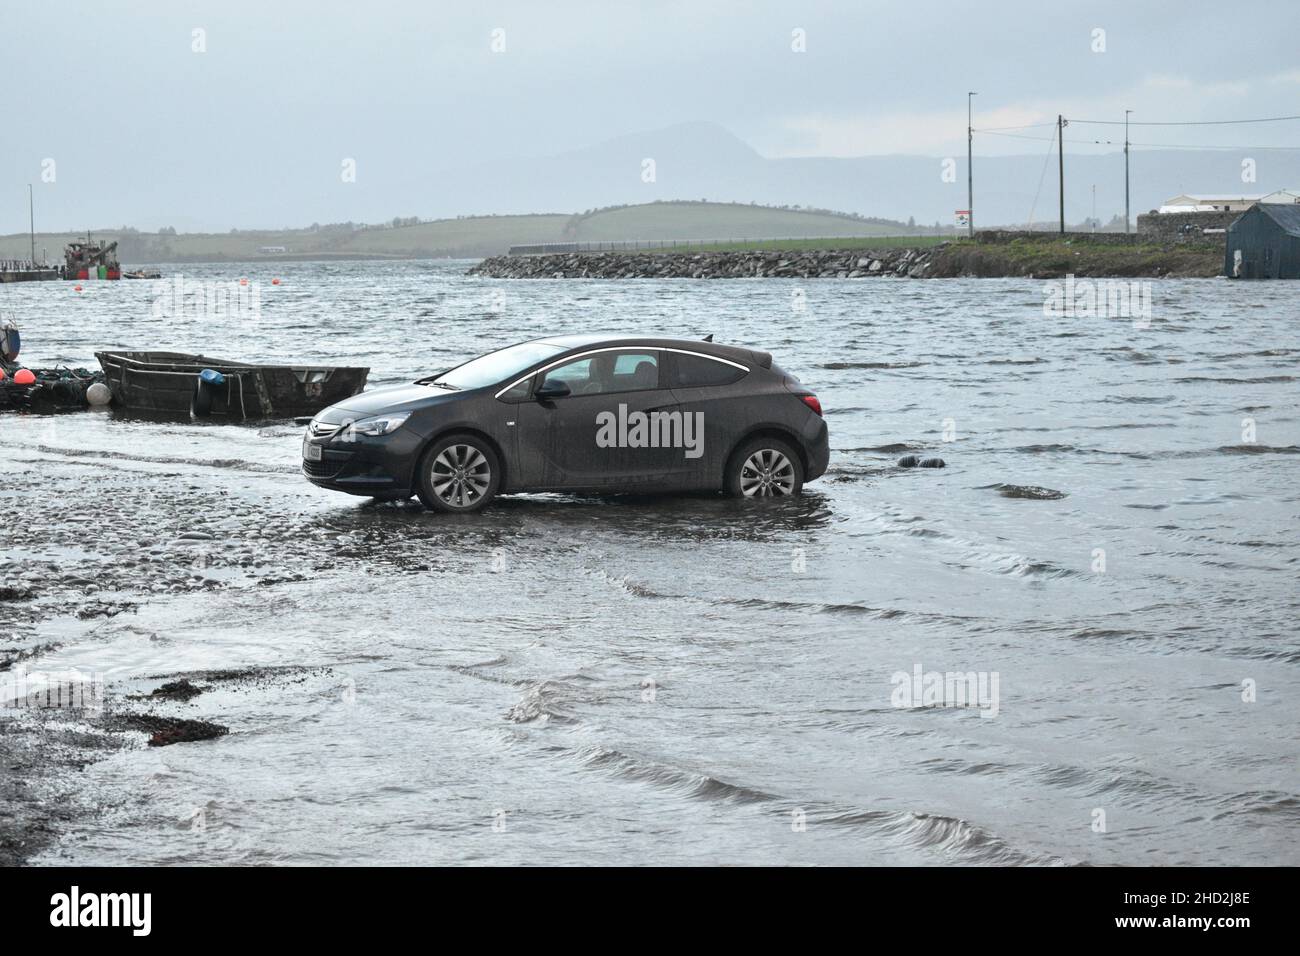 Bantry, West Cork, Ireland. 2nd Jan, 2022. As the High tide reaches the Bantry quay, the parking lot nearby floods. Cedit: Karlis Dzjamko/Alamy Live News. Stock Photo